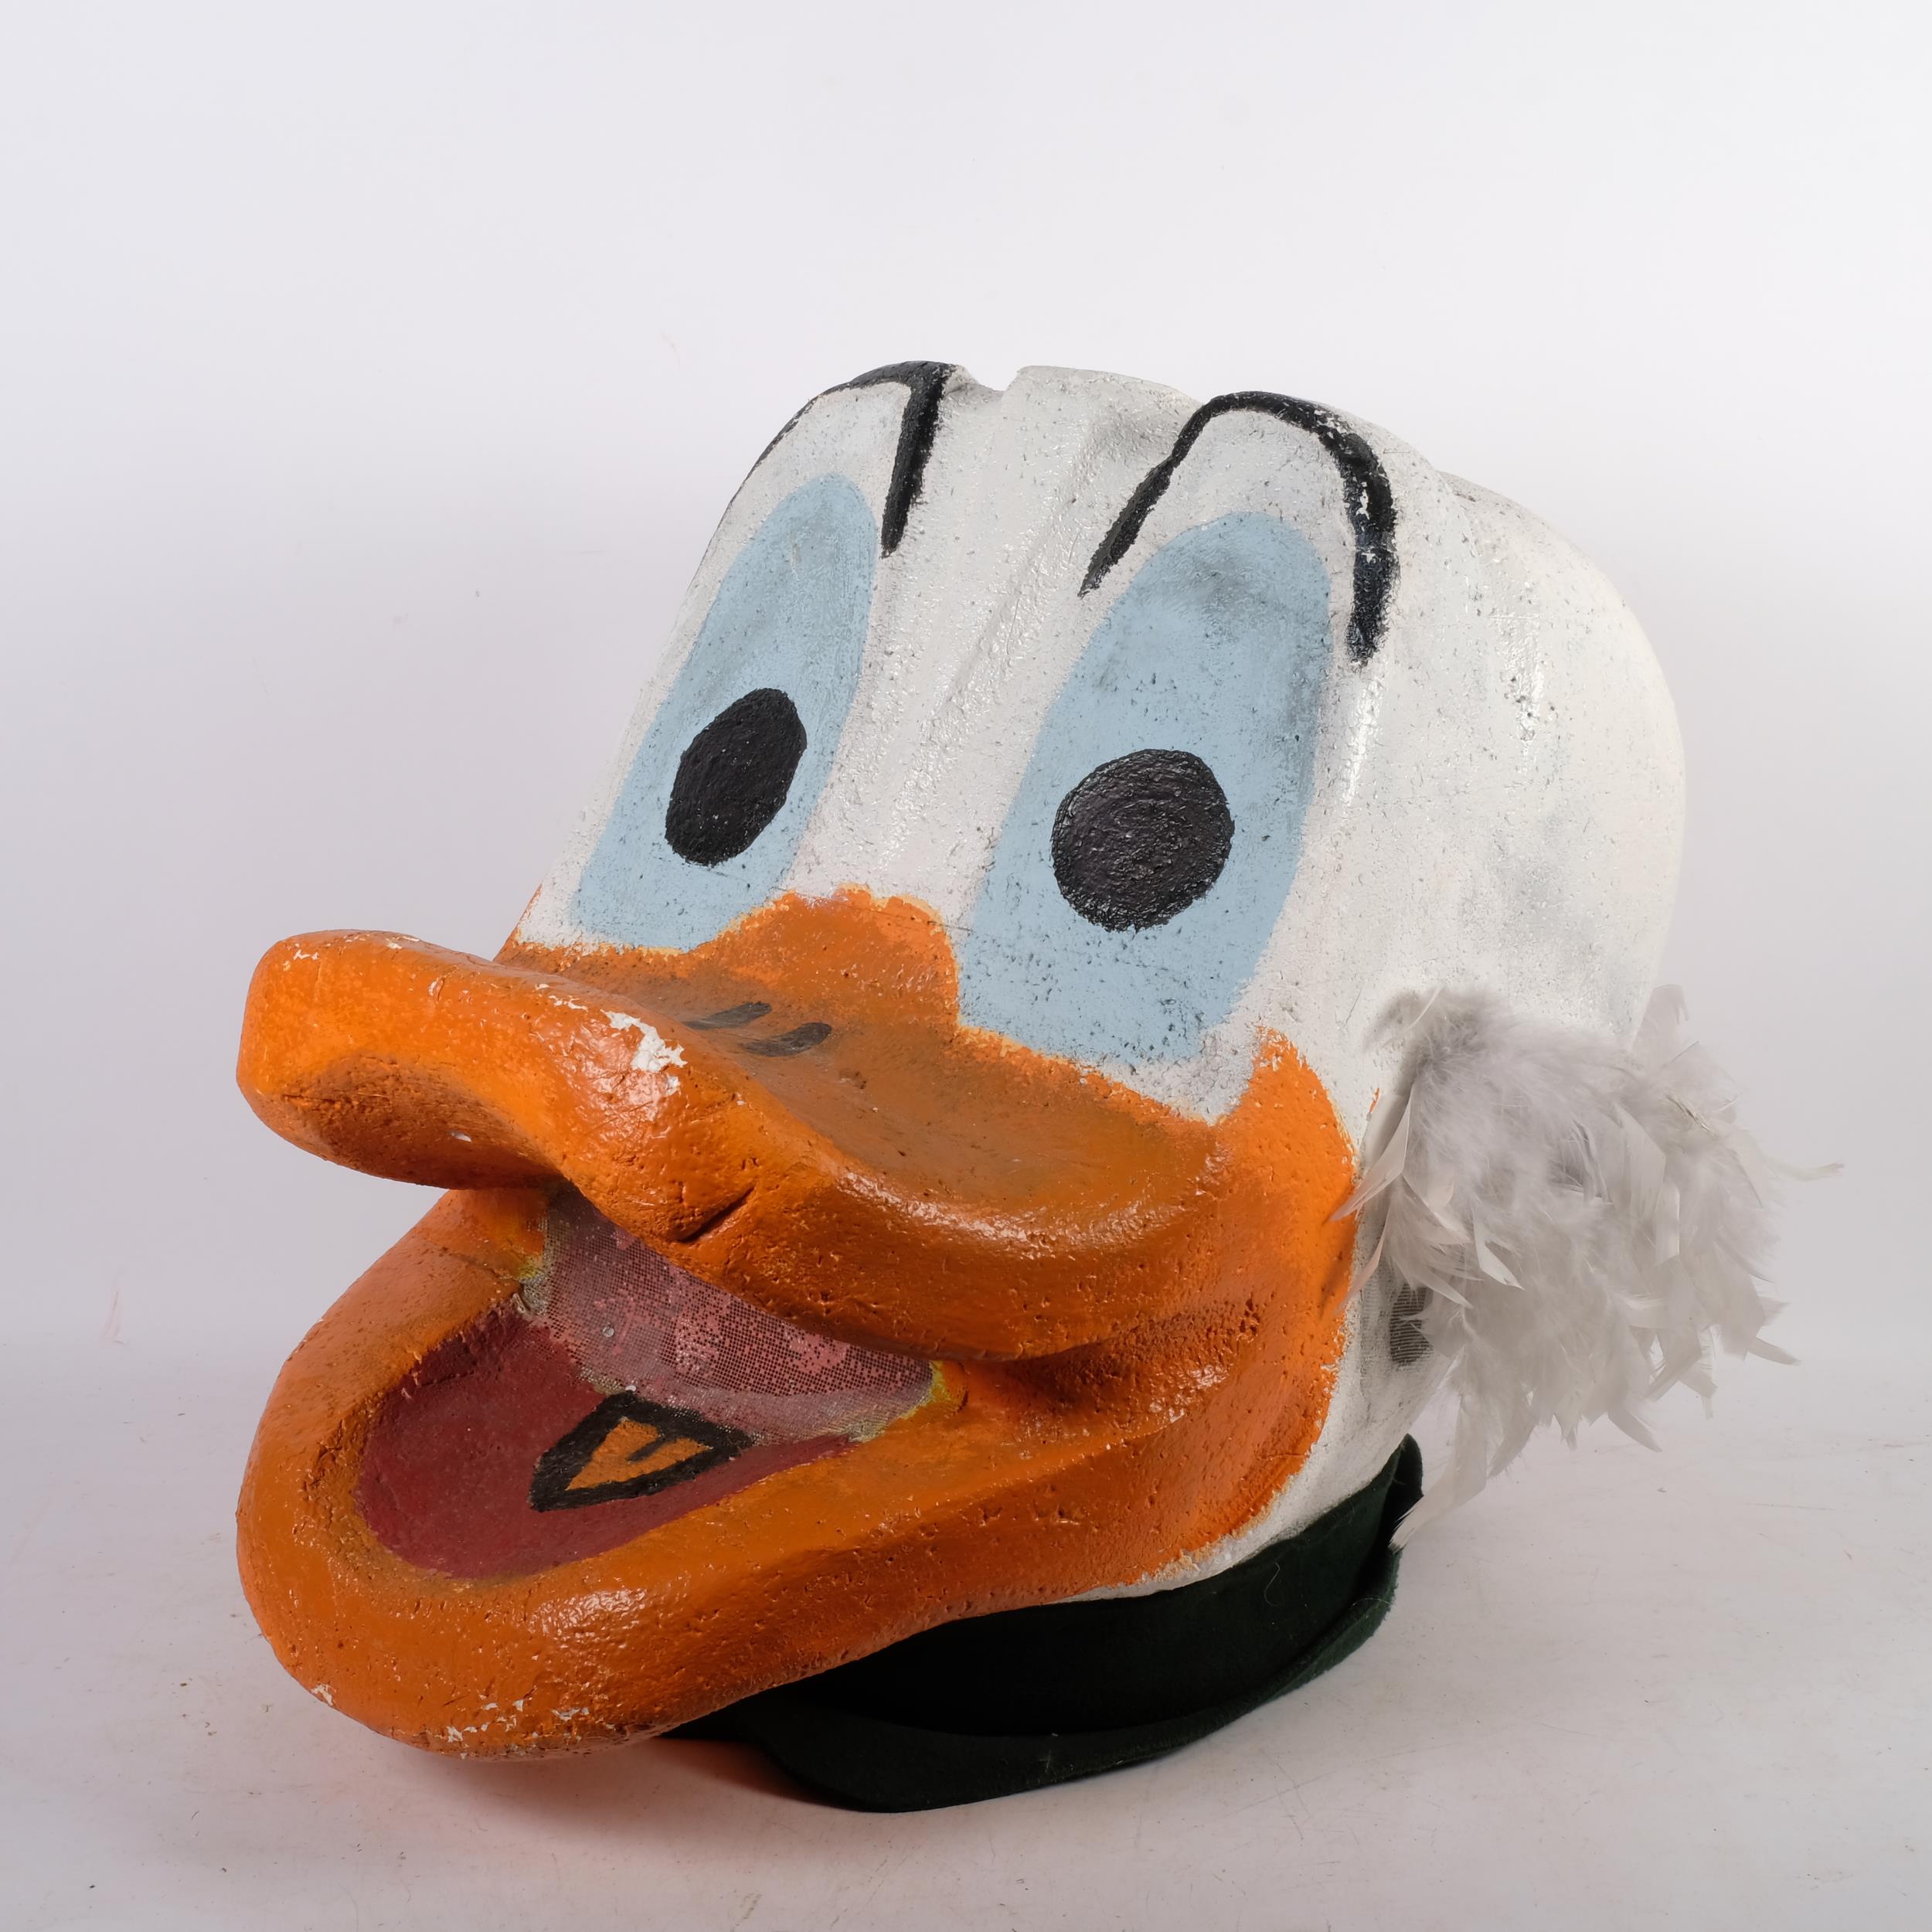 2 similar polystyrene painted Donald Duck style suit masks for carnival outfits, largest 48cm x 55cm - Image 2 of 2